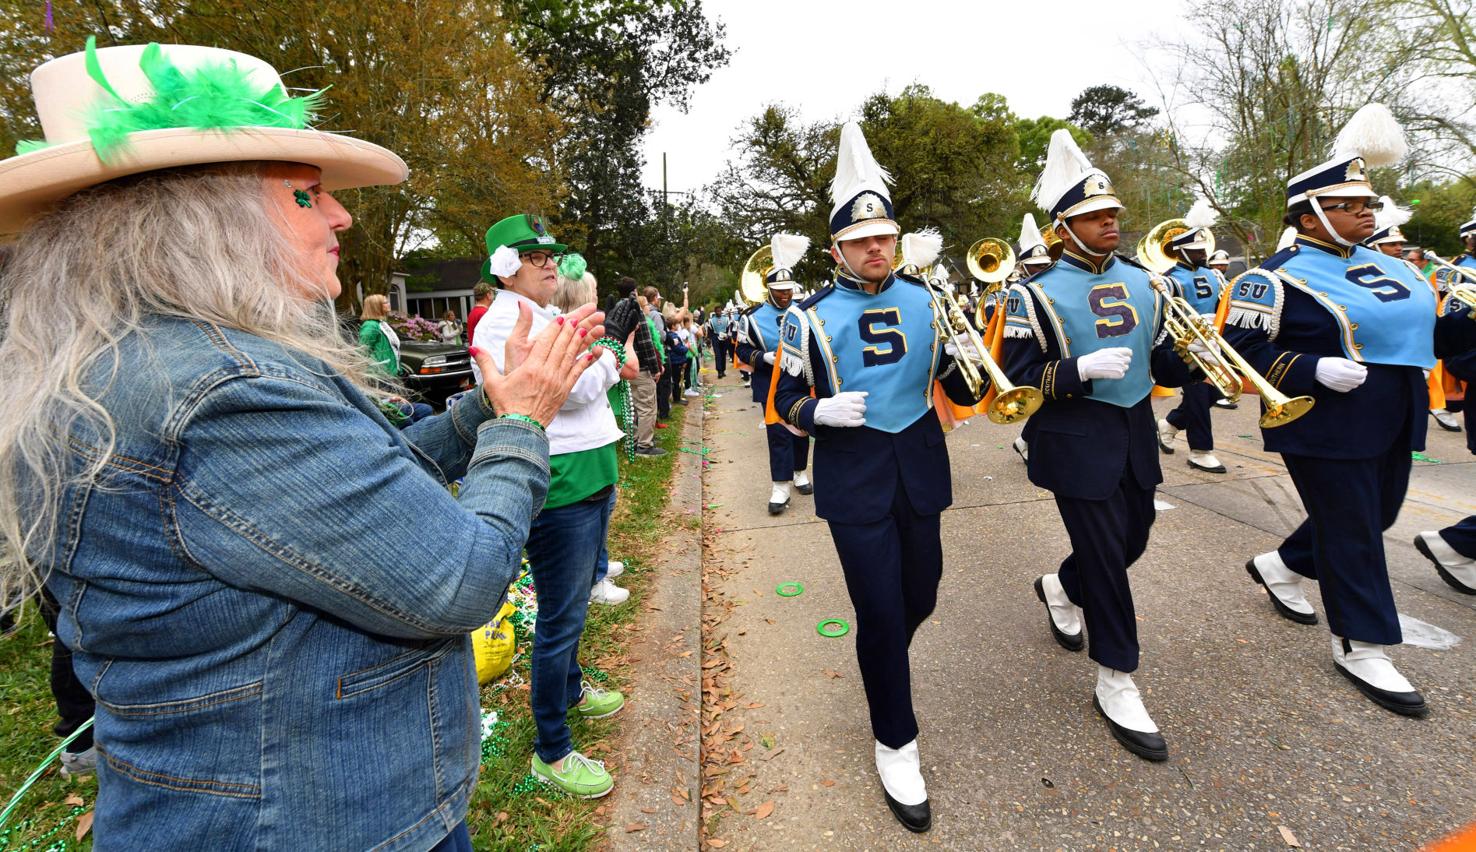 Photos, video 'Twas a green old time, at 34th annual 'Wearin' of the